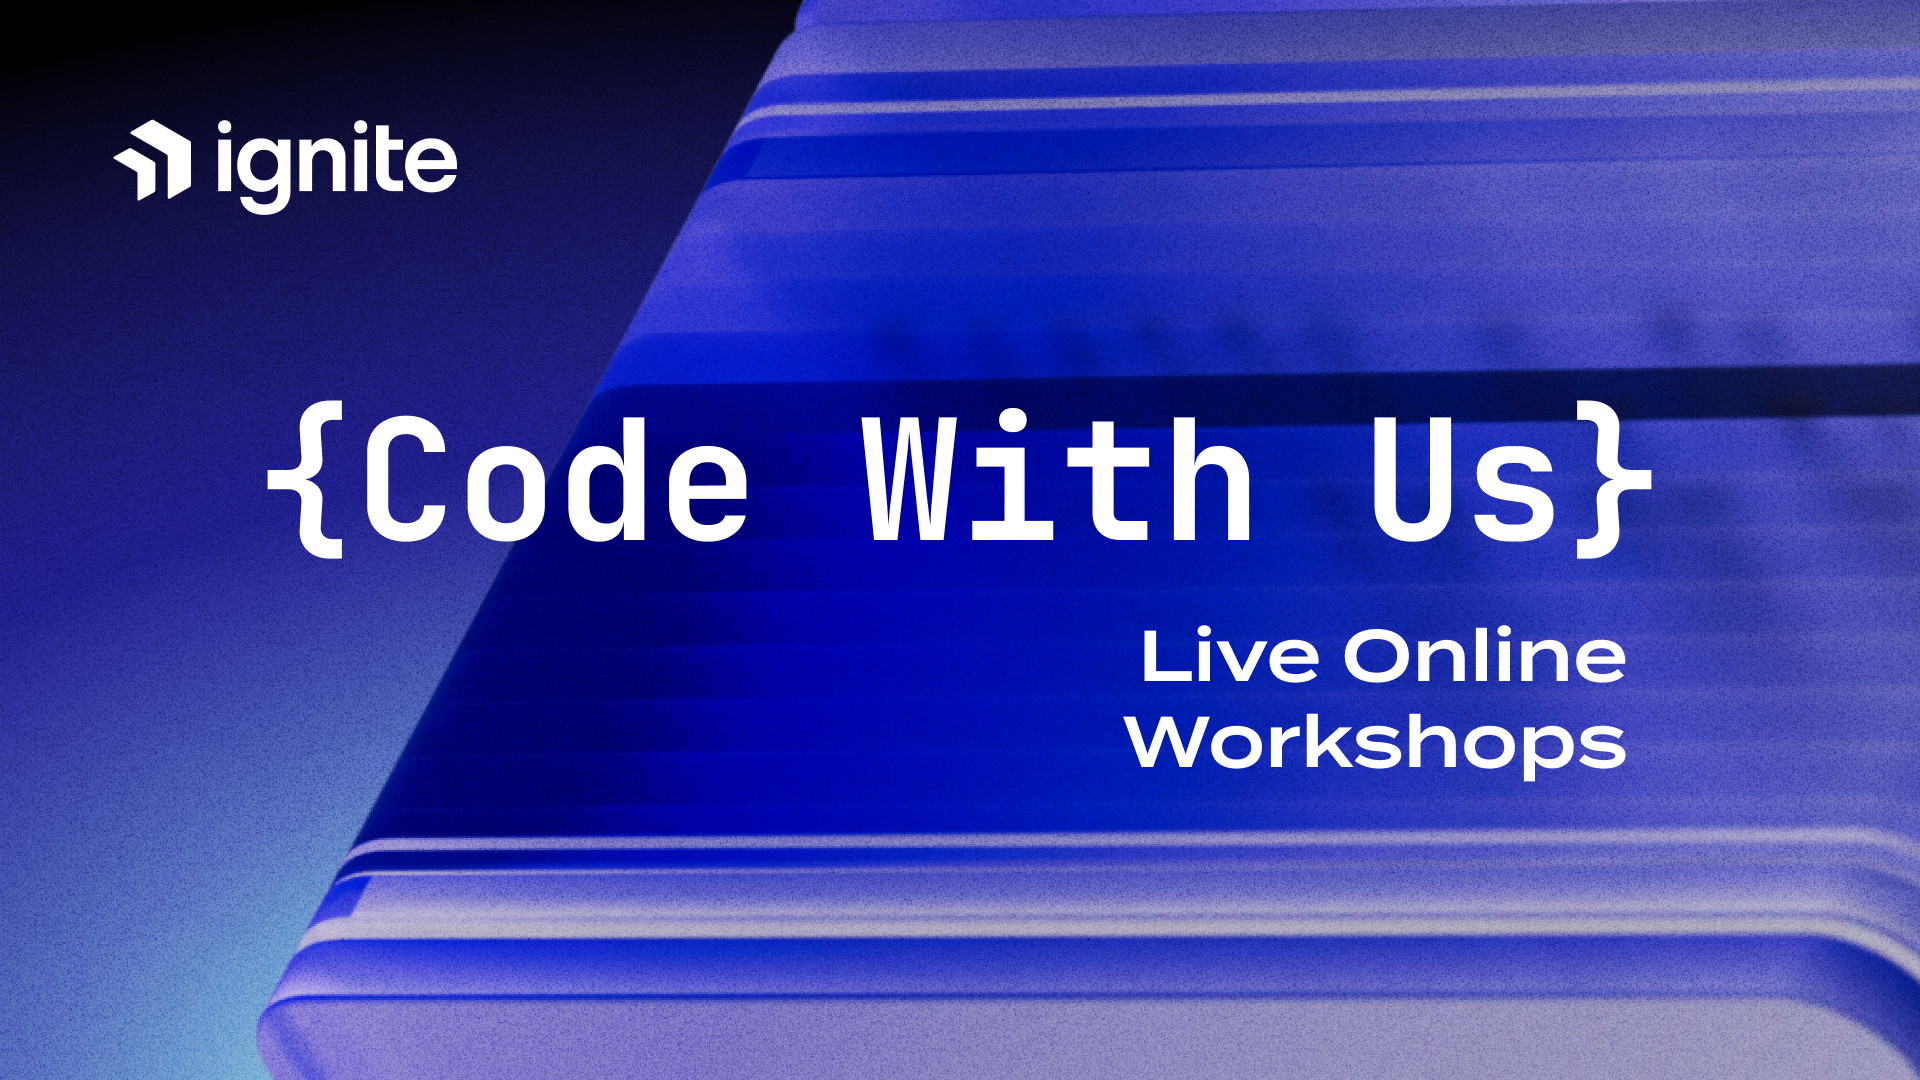 Ignite Code With Us